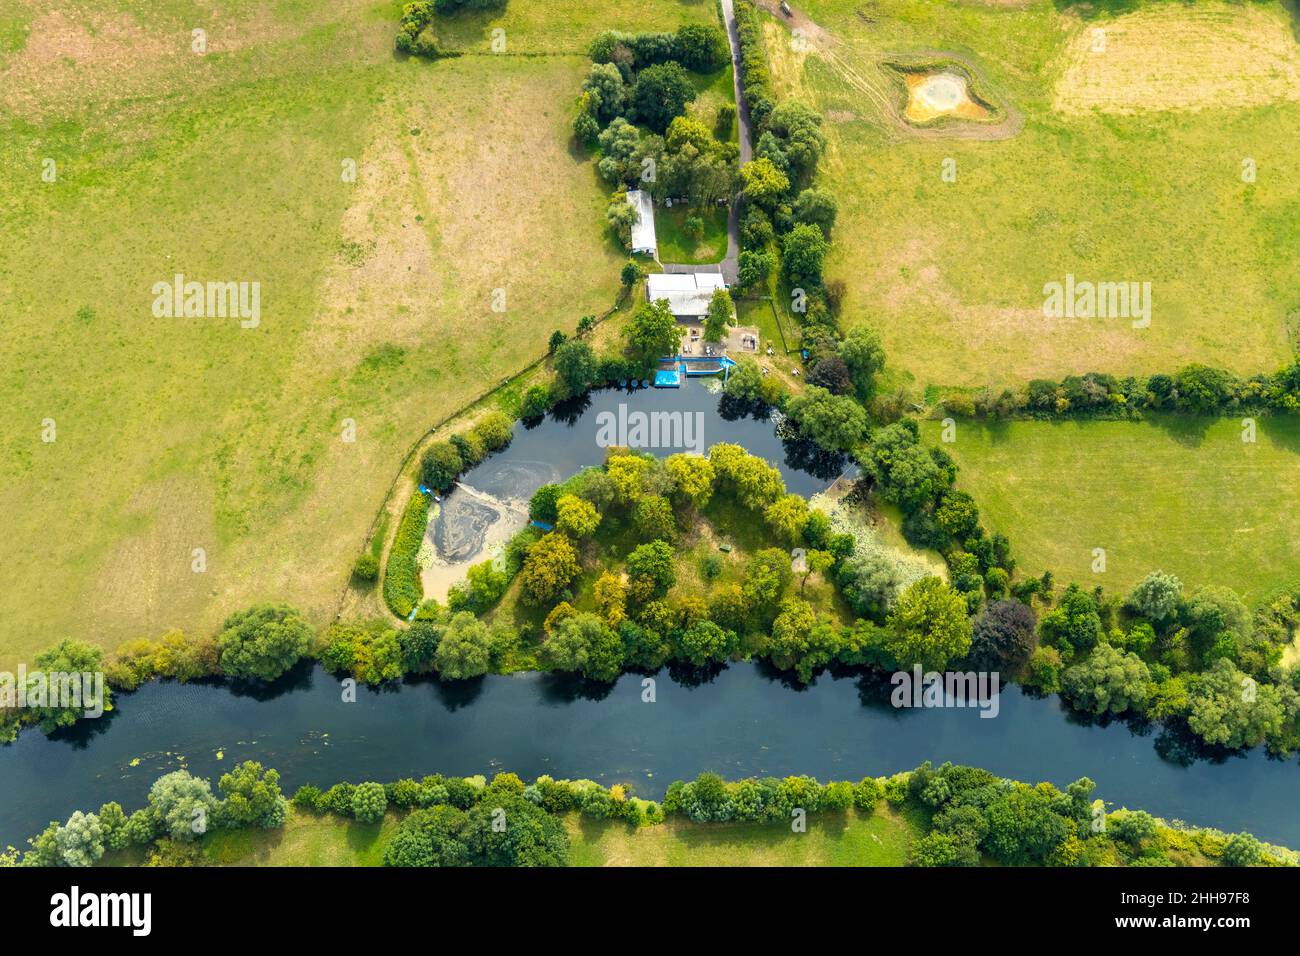 Aerial photo, meander, meandering river Lippe, Lippe, Lippe meadows, straightening, disused branches, Lippeschleife, north of Dorf Heil, Naturfreibad Stock Photo